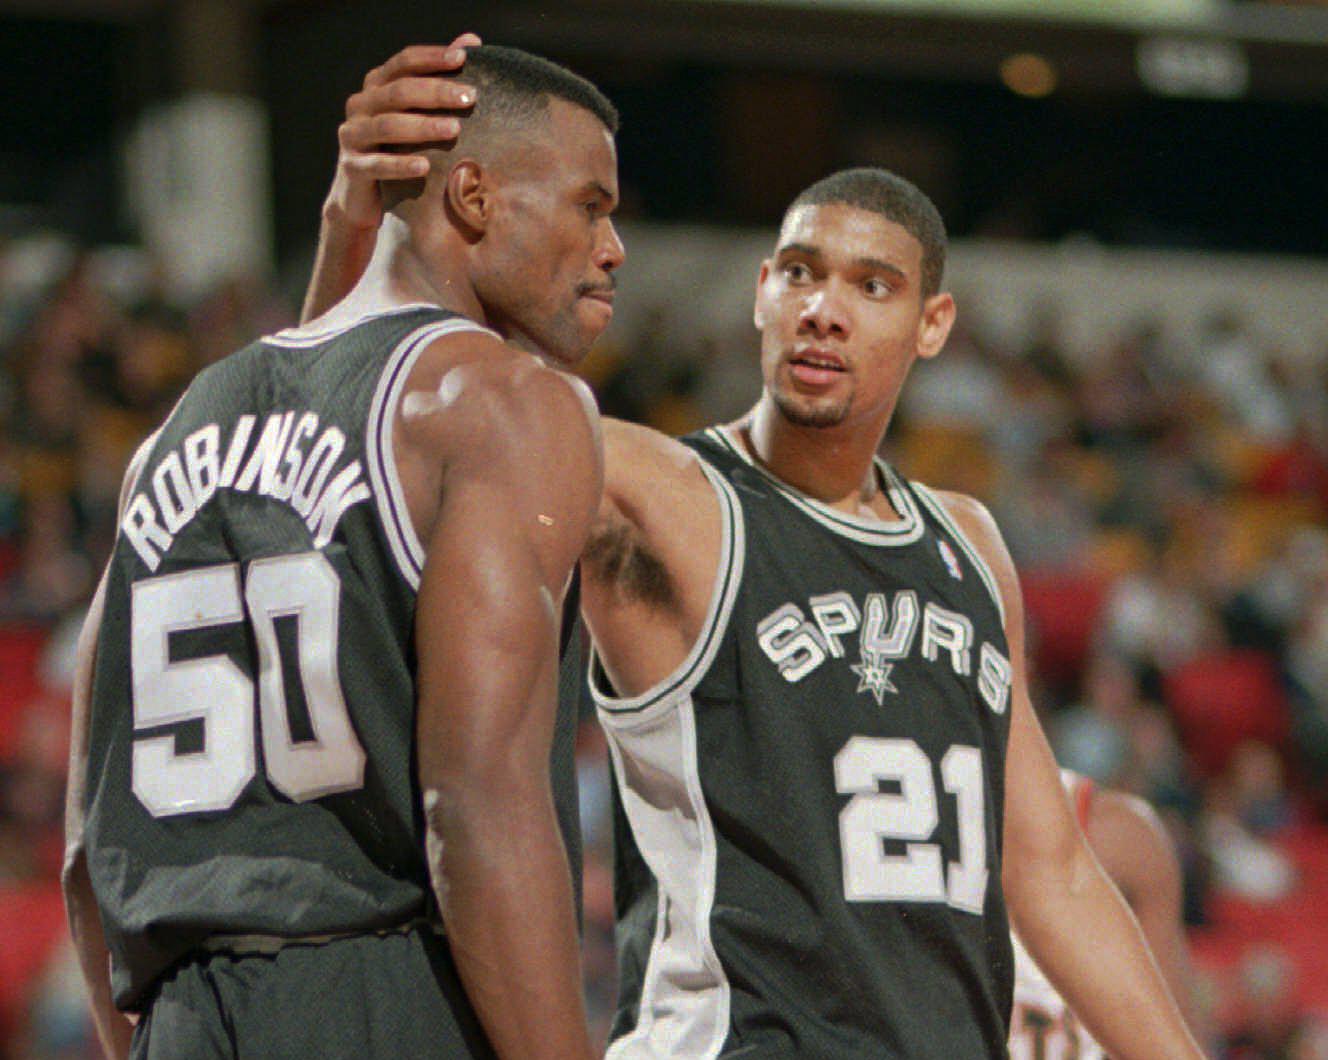 For openers Looking back at Spurs’ memorable firstgameofseason moments